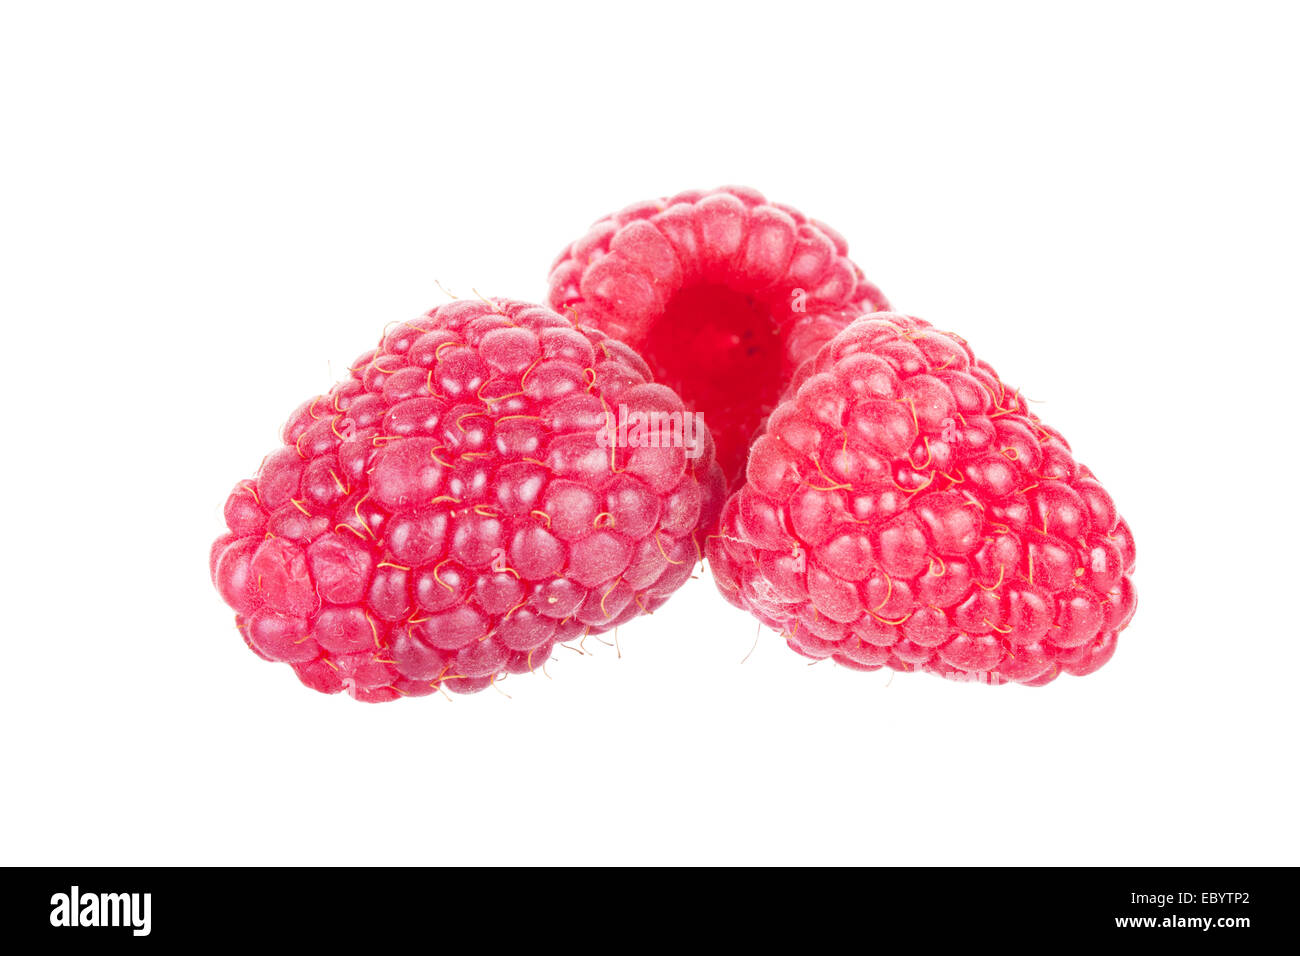 Three berries of a raspberry on a white background,  isolated Stock Photo